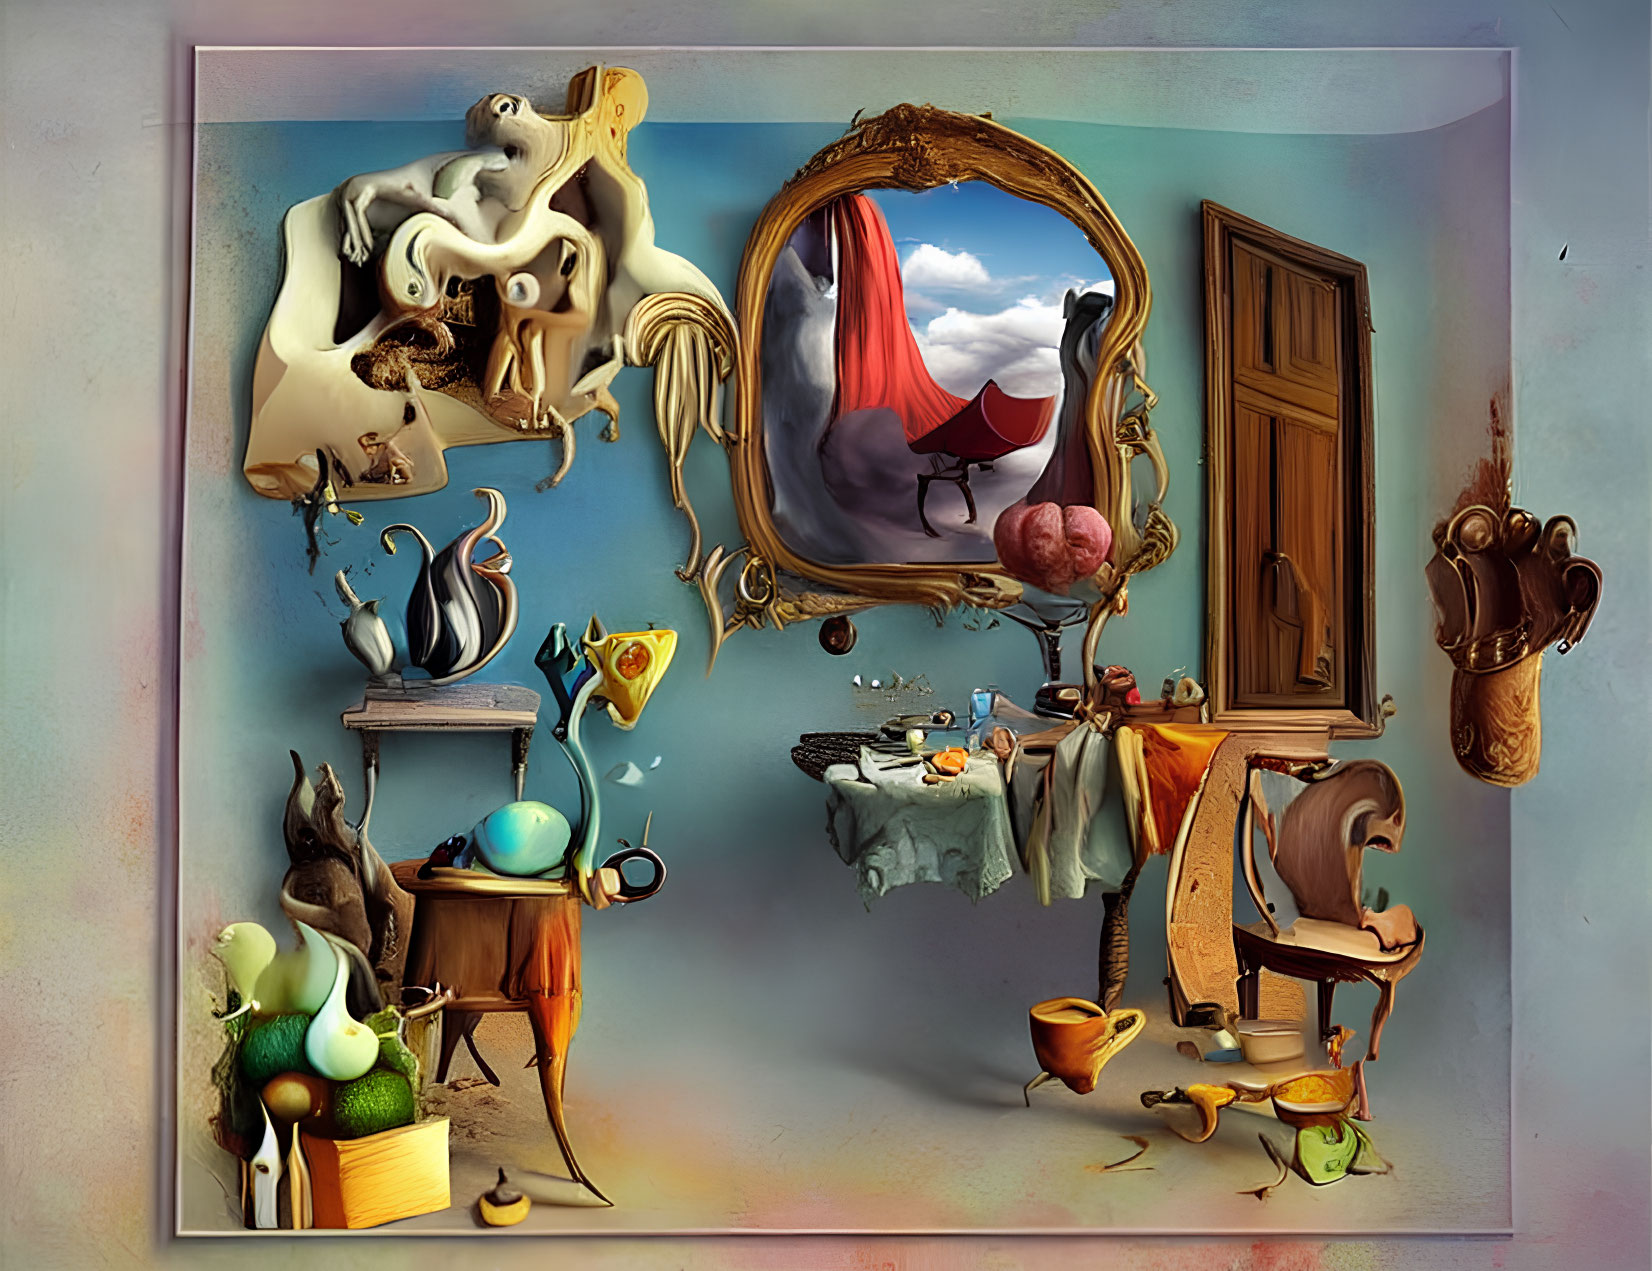 Distorted objects in surrealistic room with ornate mirror and floating elements